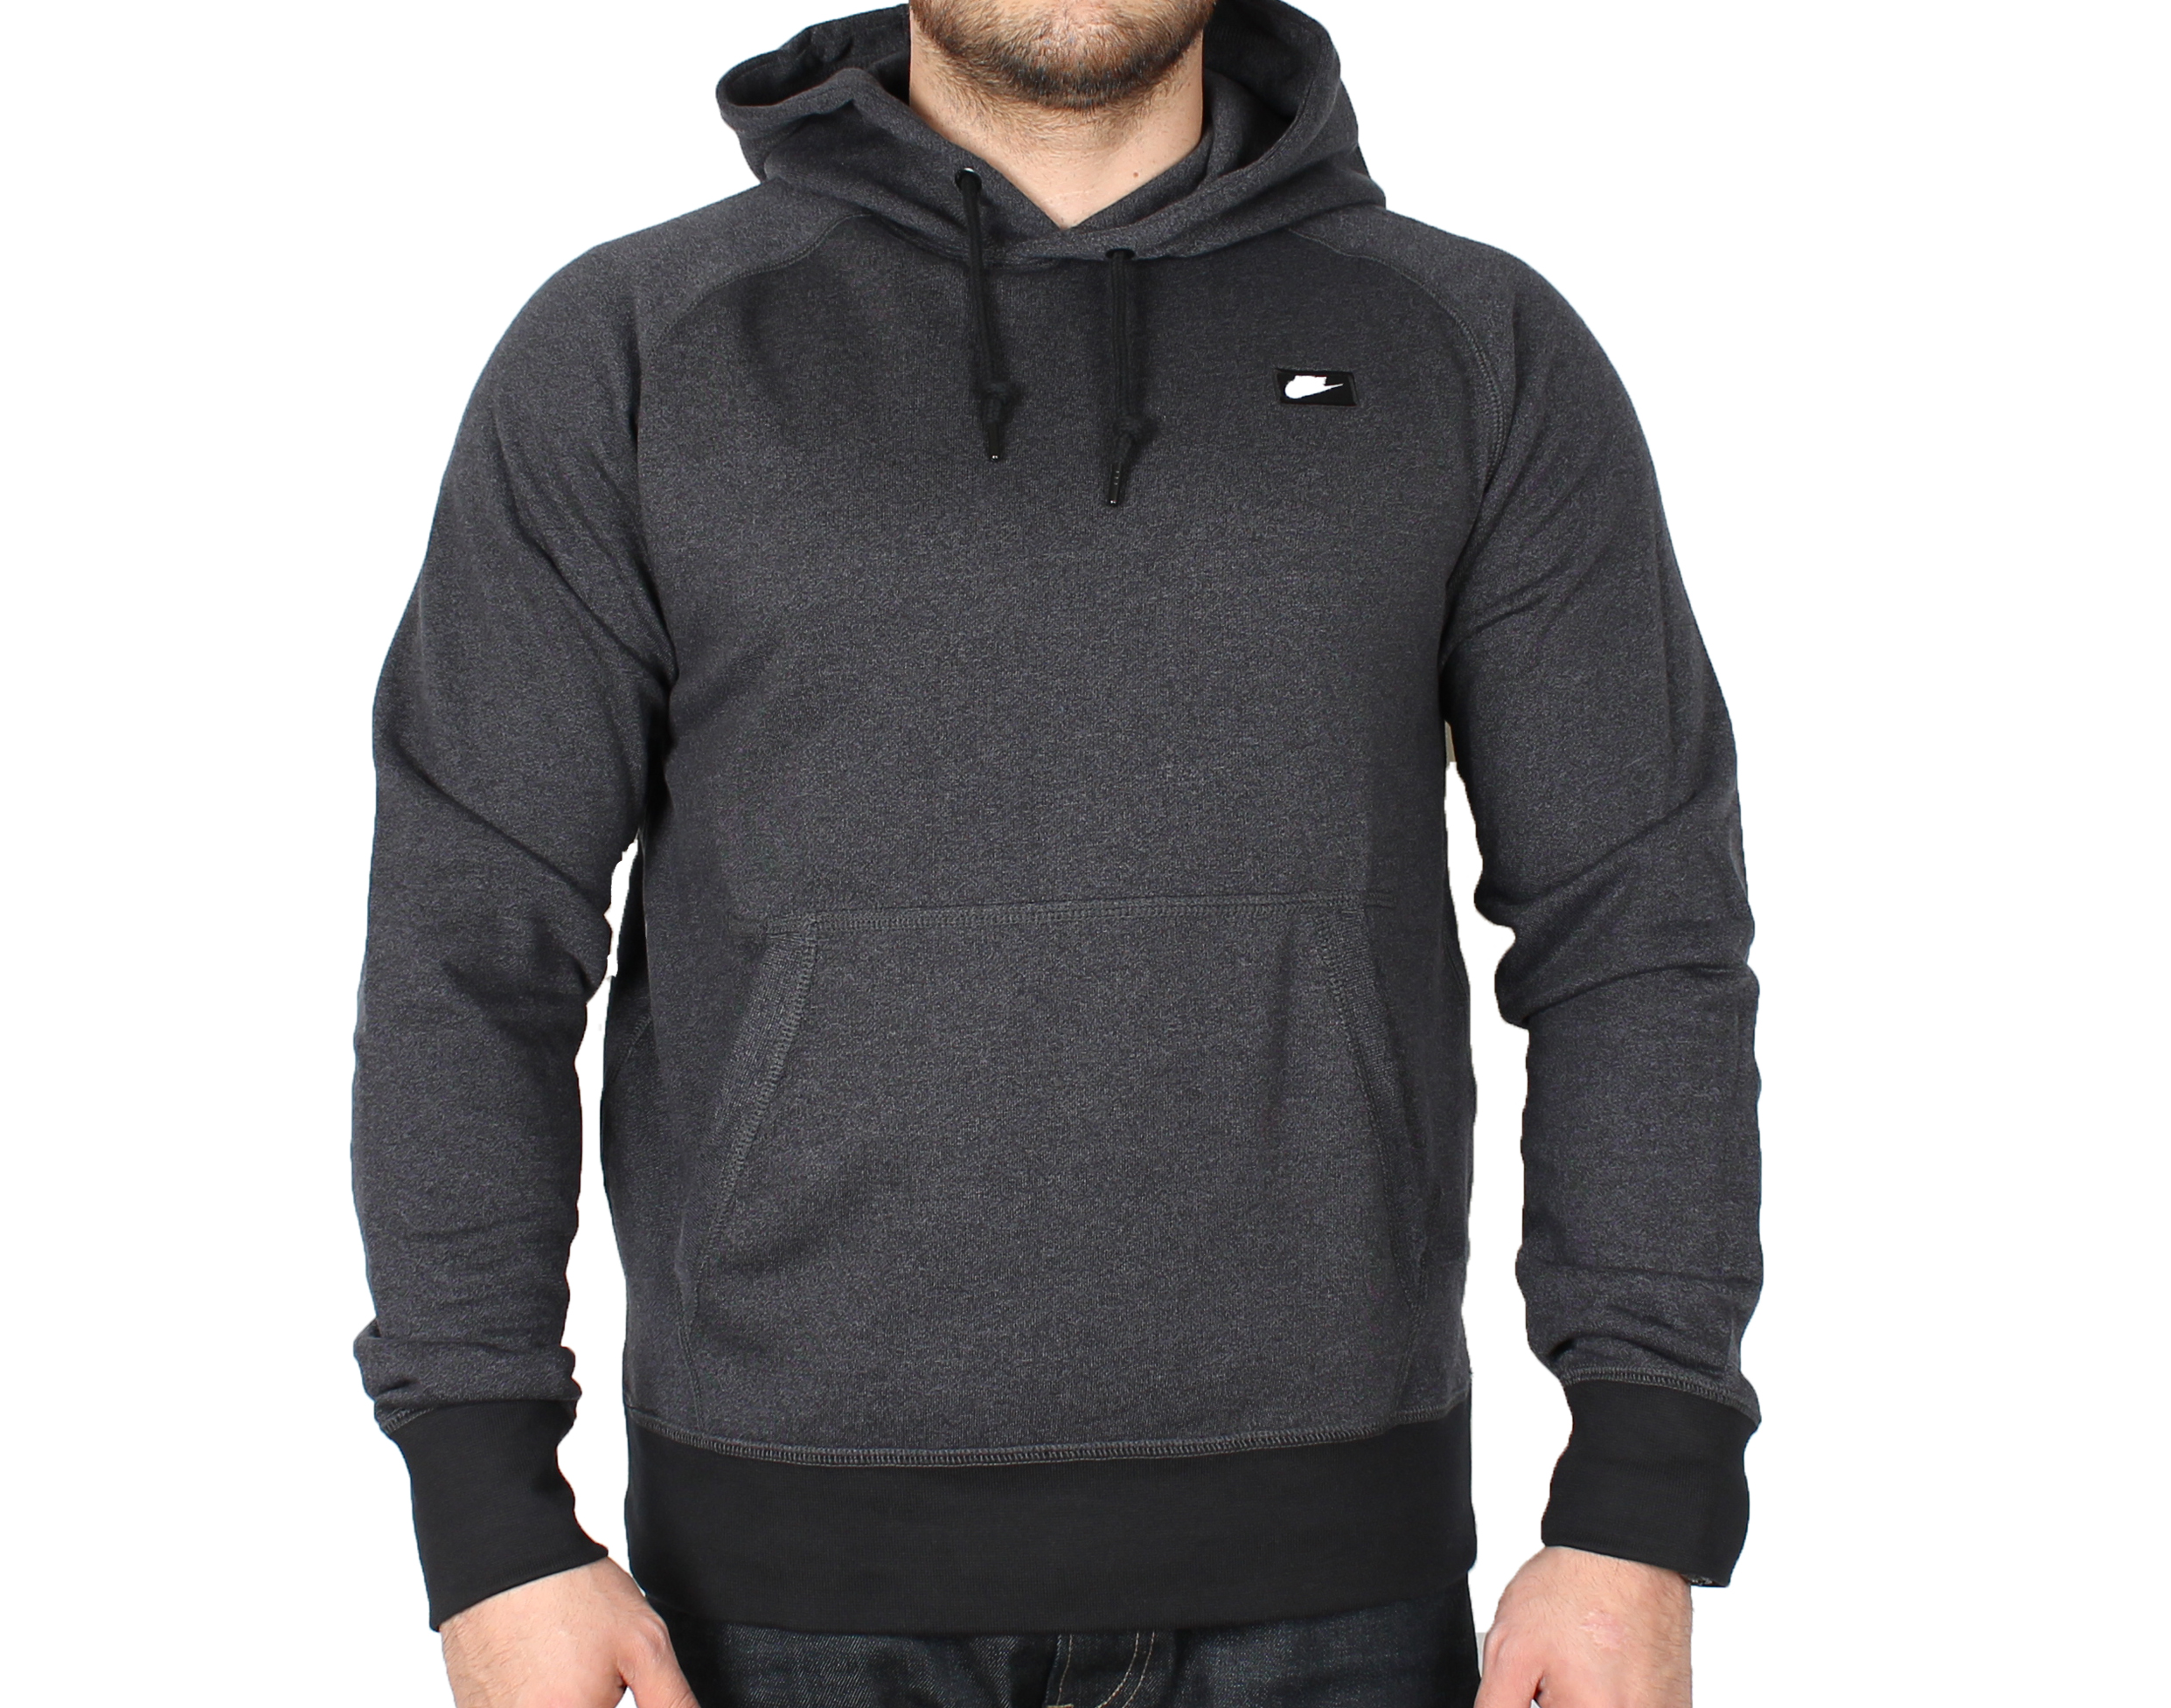 Nike AW77 French Terry Shoebox Men's Hoodie Small - image 1 of 3